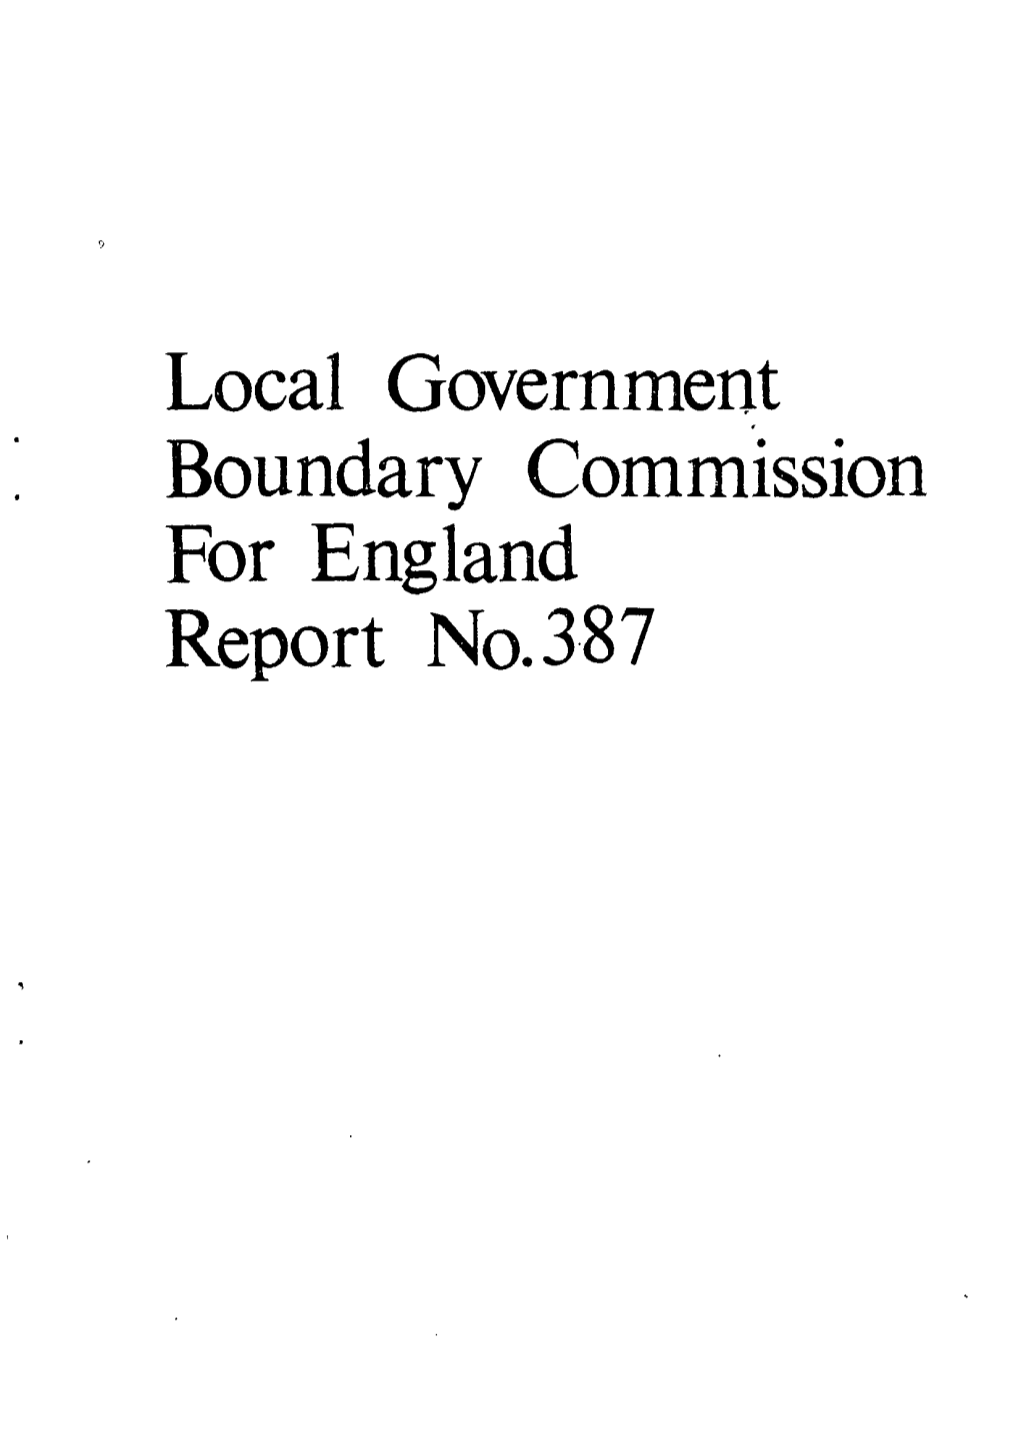 Local Government Boundary Commission for England Report No.387